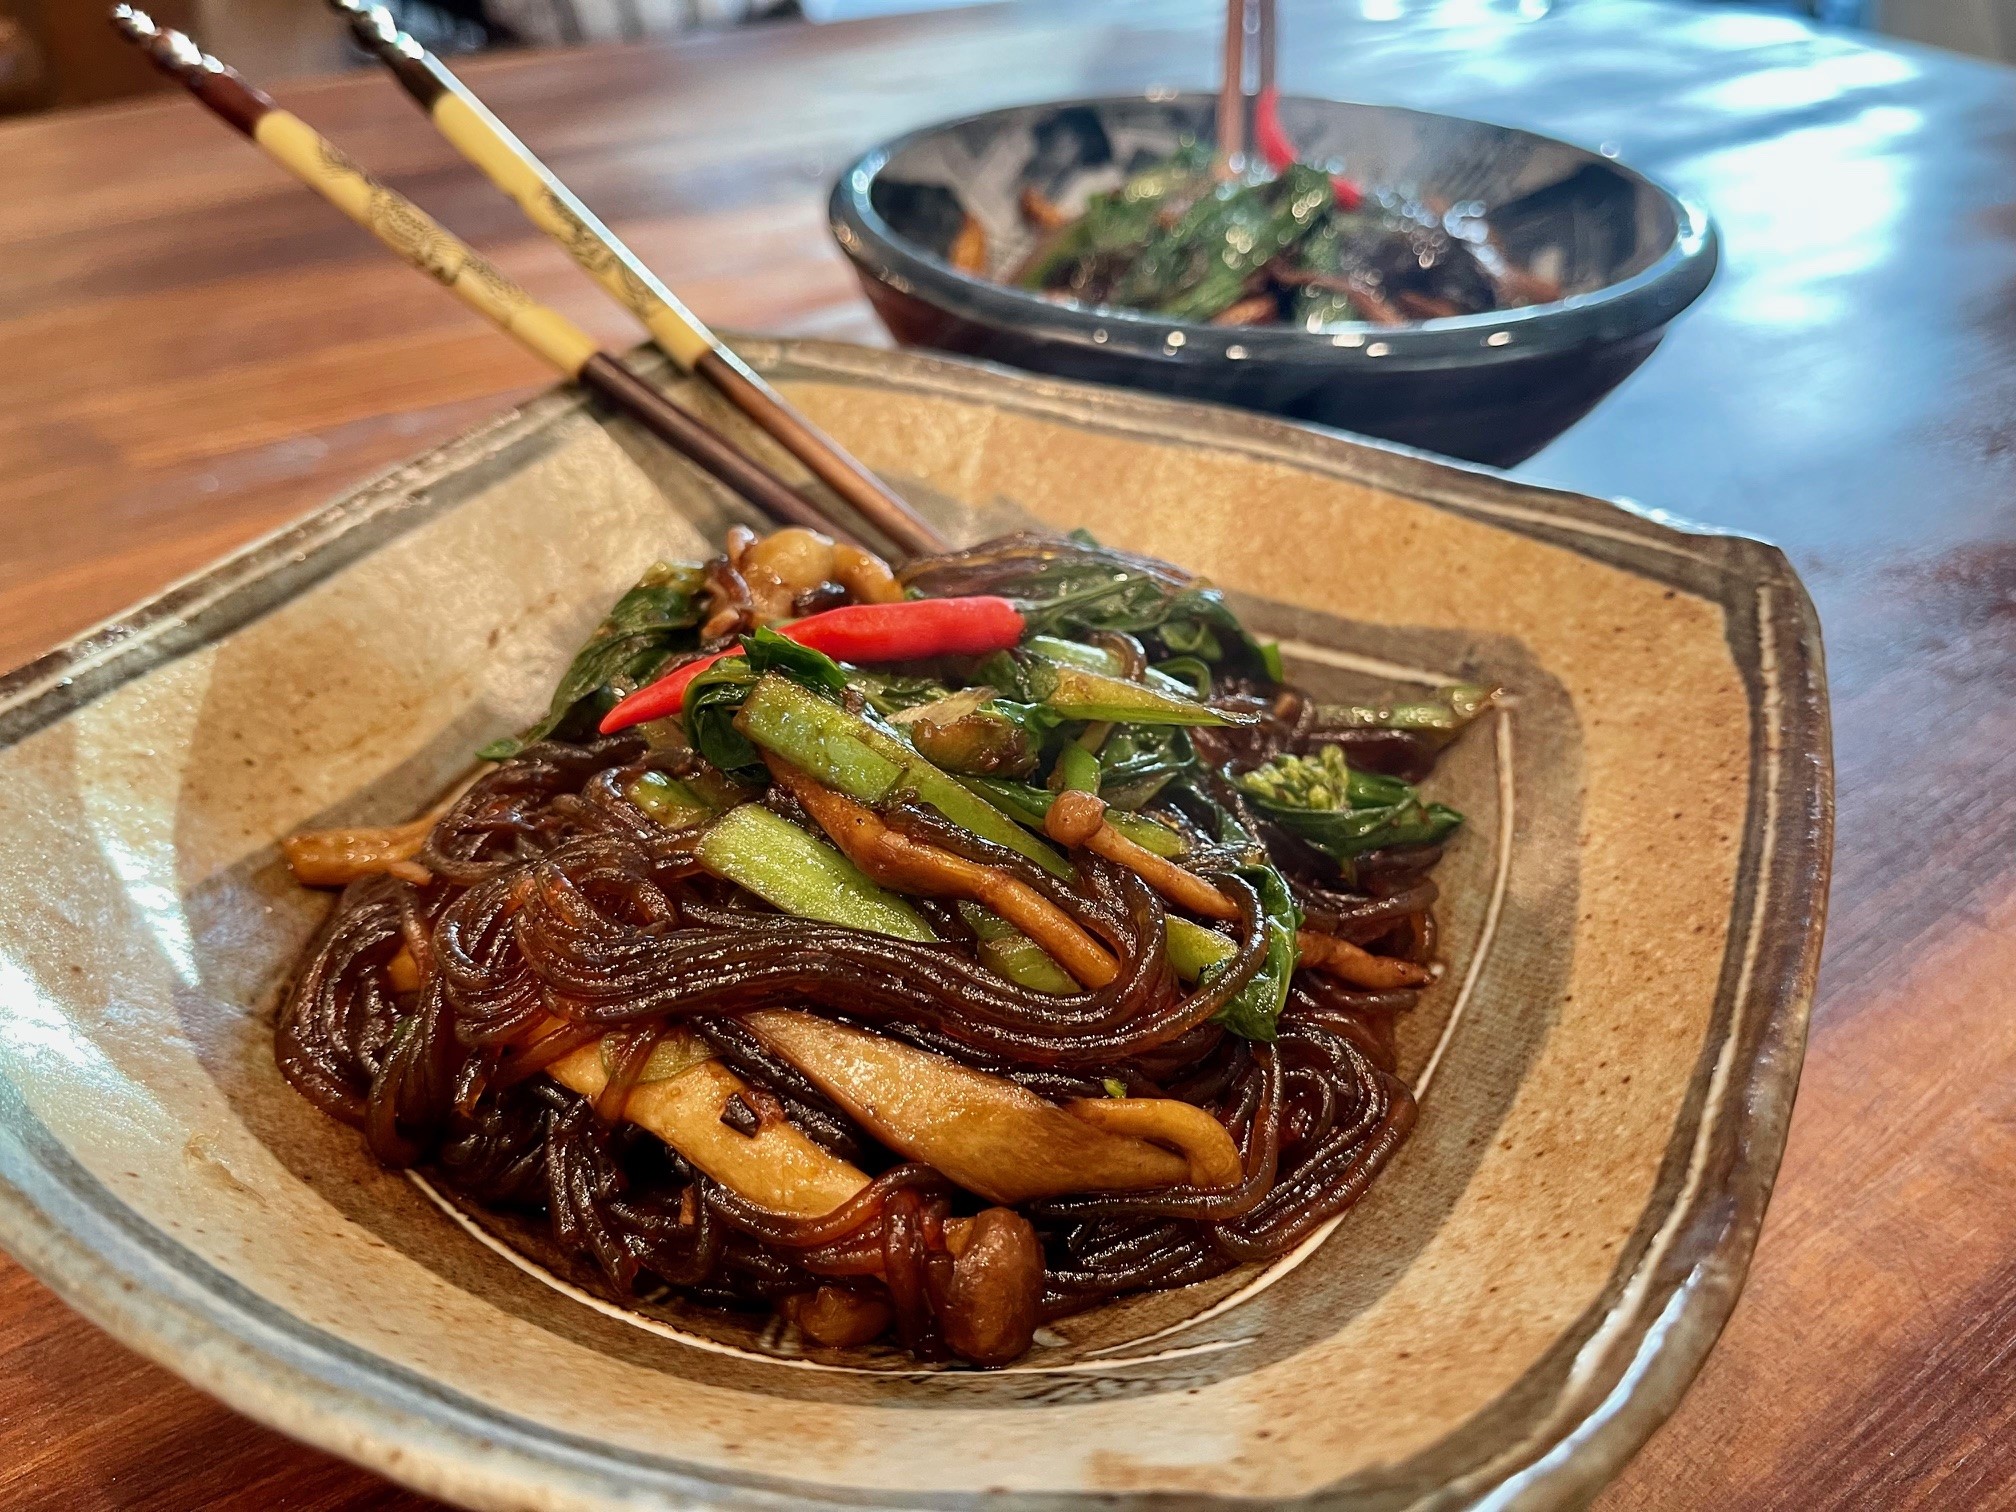 Glass Noodles with Mushrooms and Chinese Broccoli